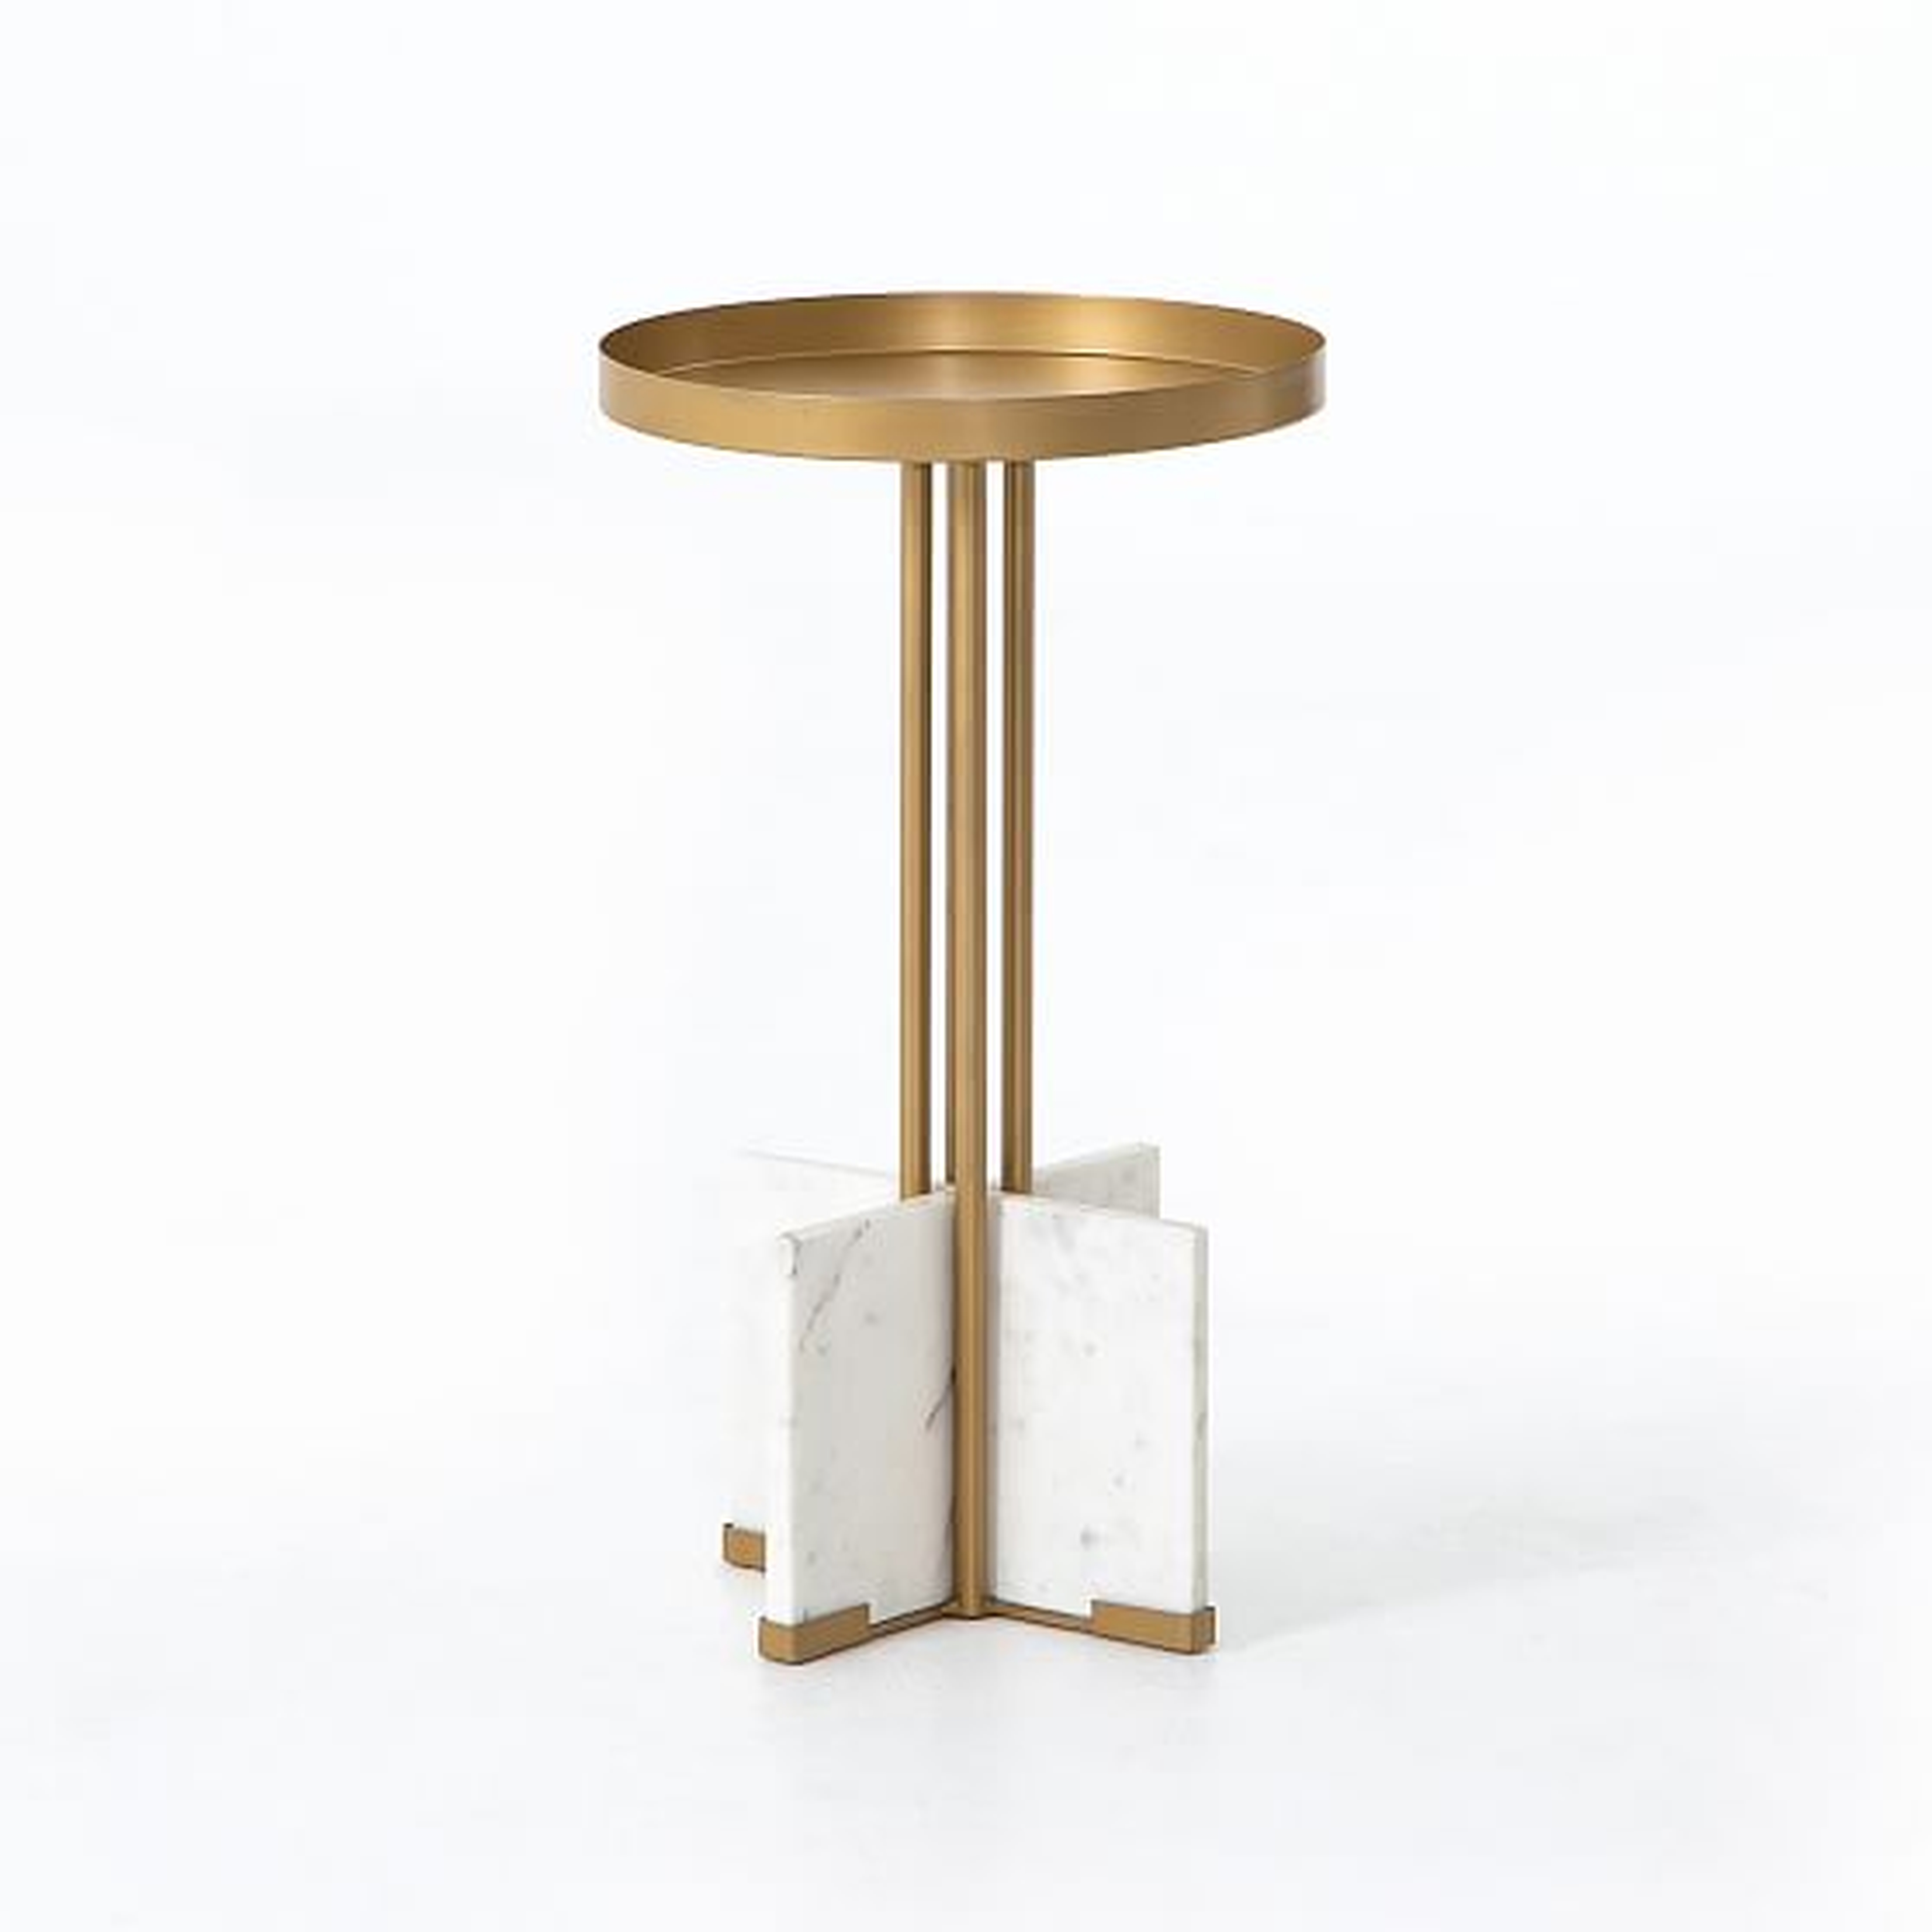 Nyla End Table, Rustic Brass - West Elm